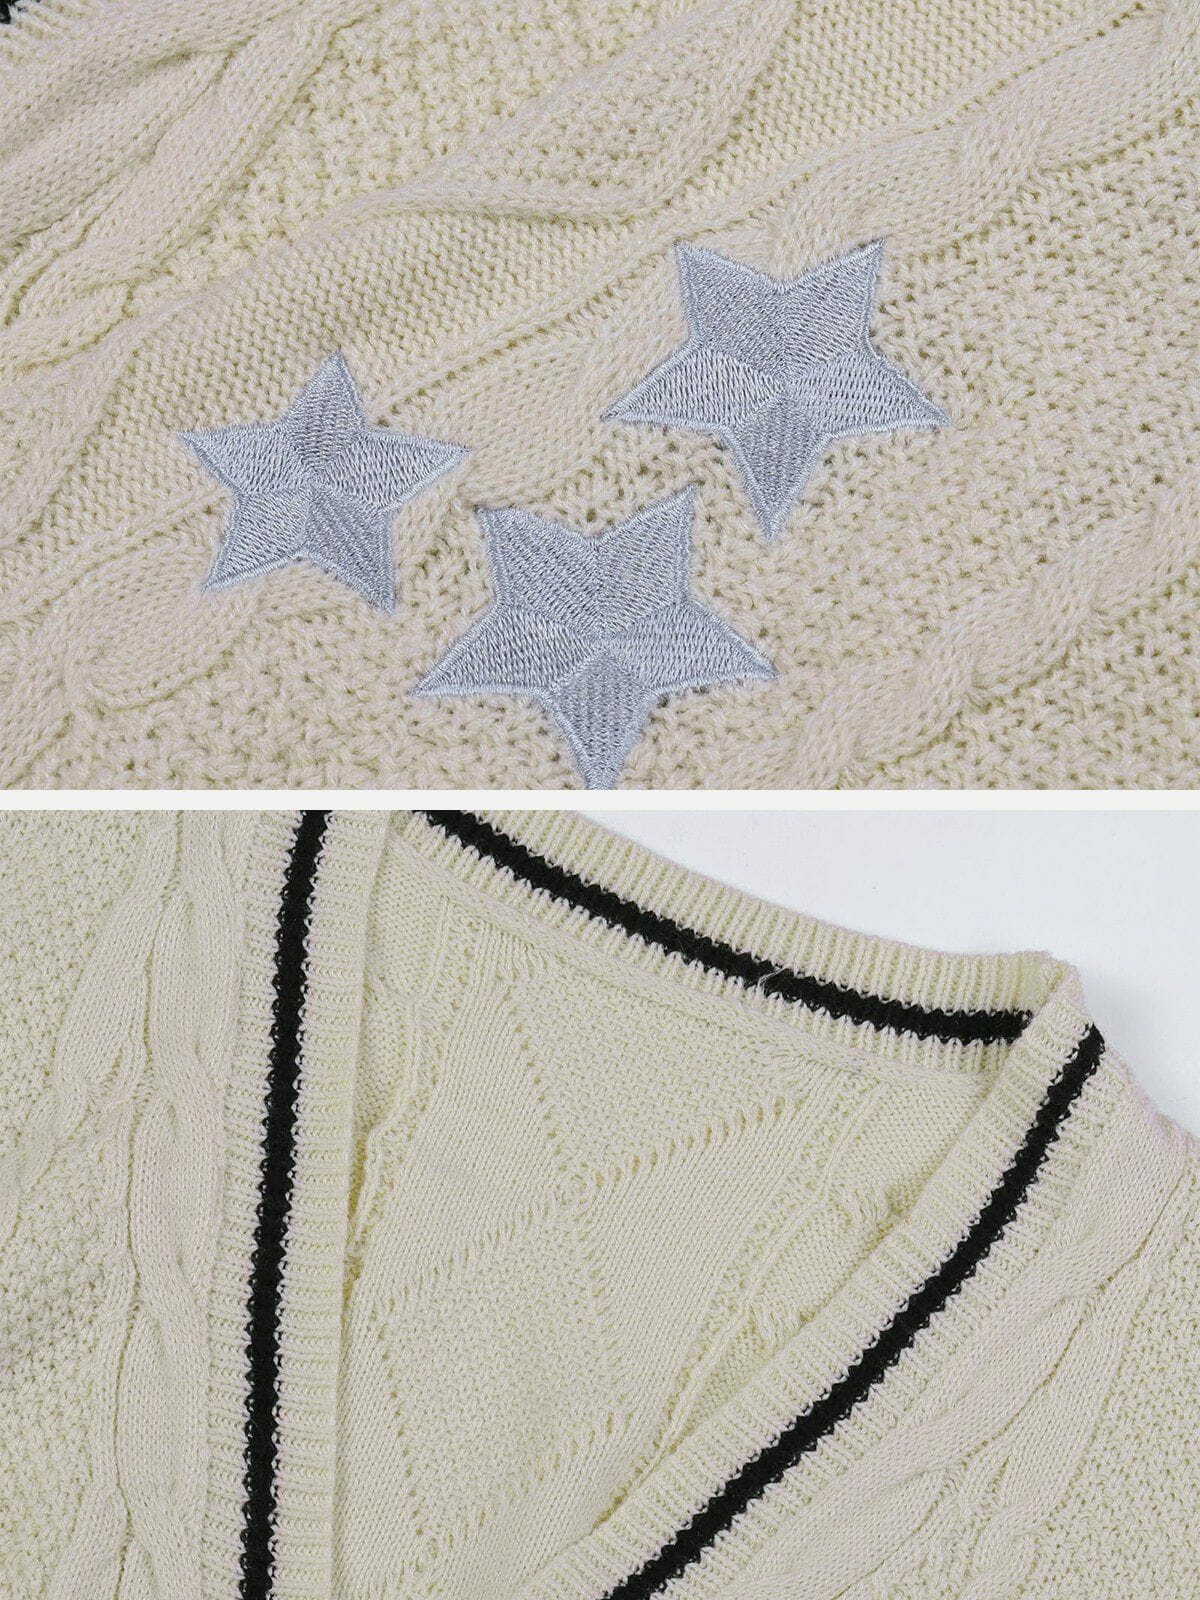 embroidered star cardigan edgy streetwear chic 2553